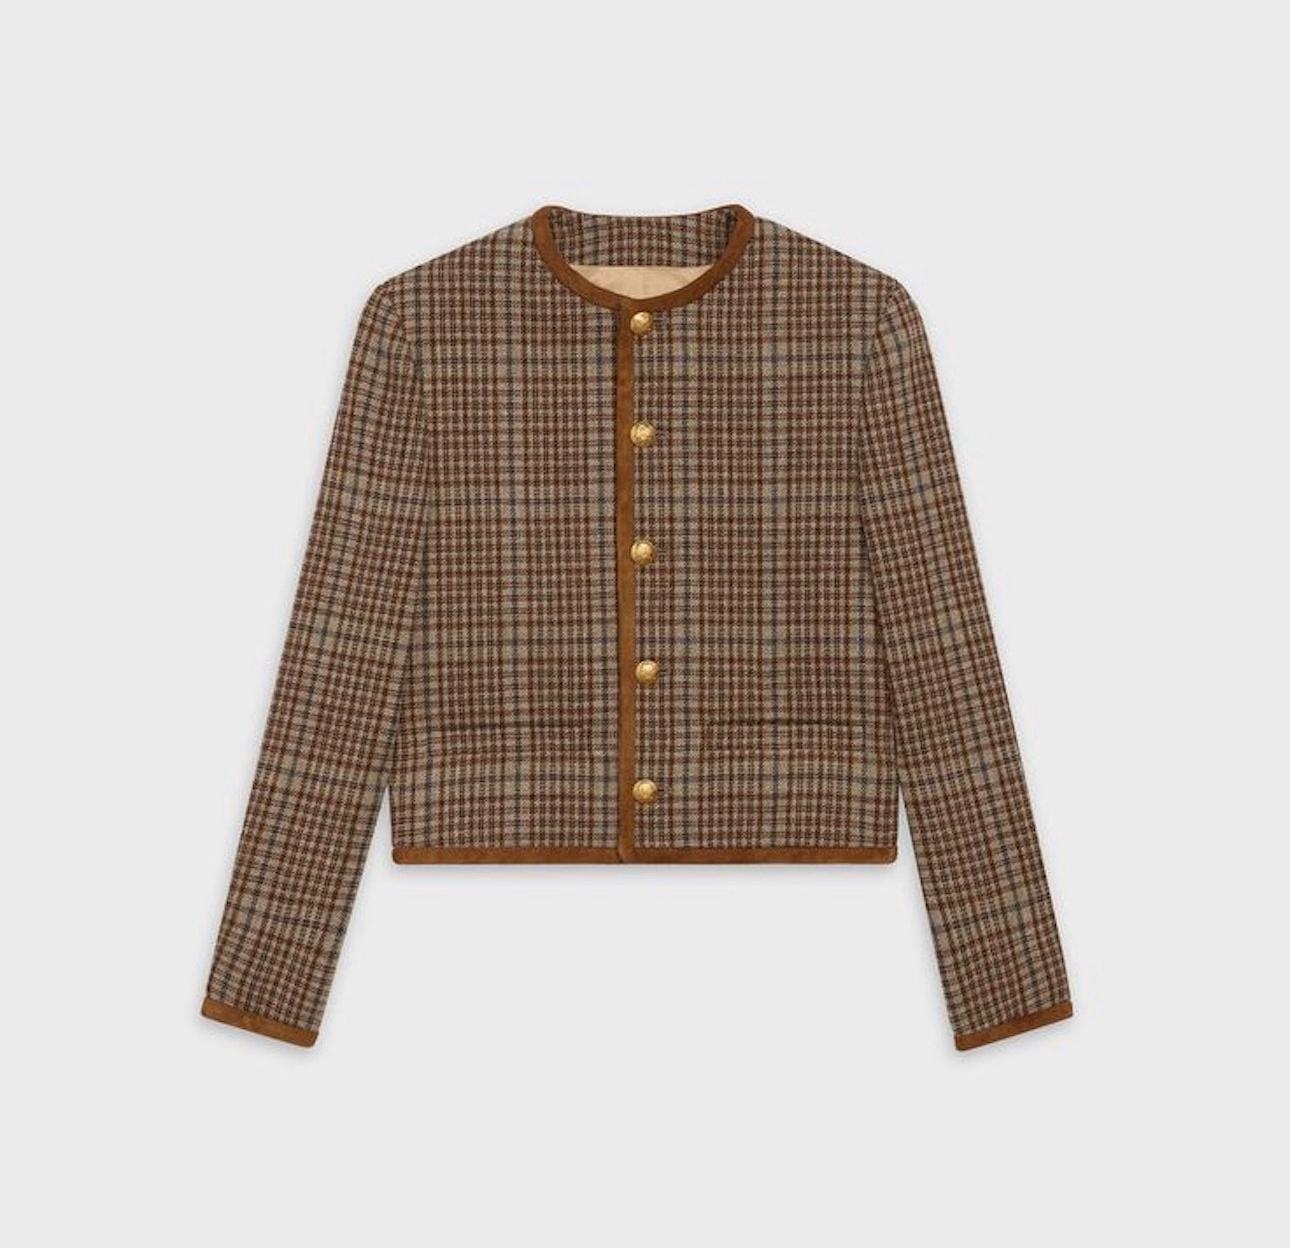 Celine CHASSEUR Kaia Gerber Exclusive Checkered Tweed Jacket For Sale 12